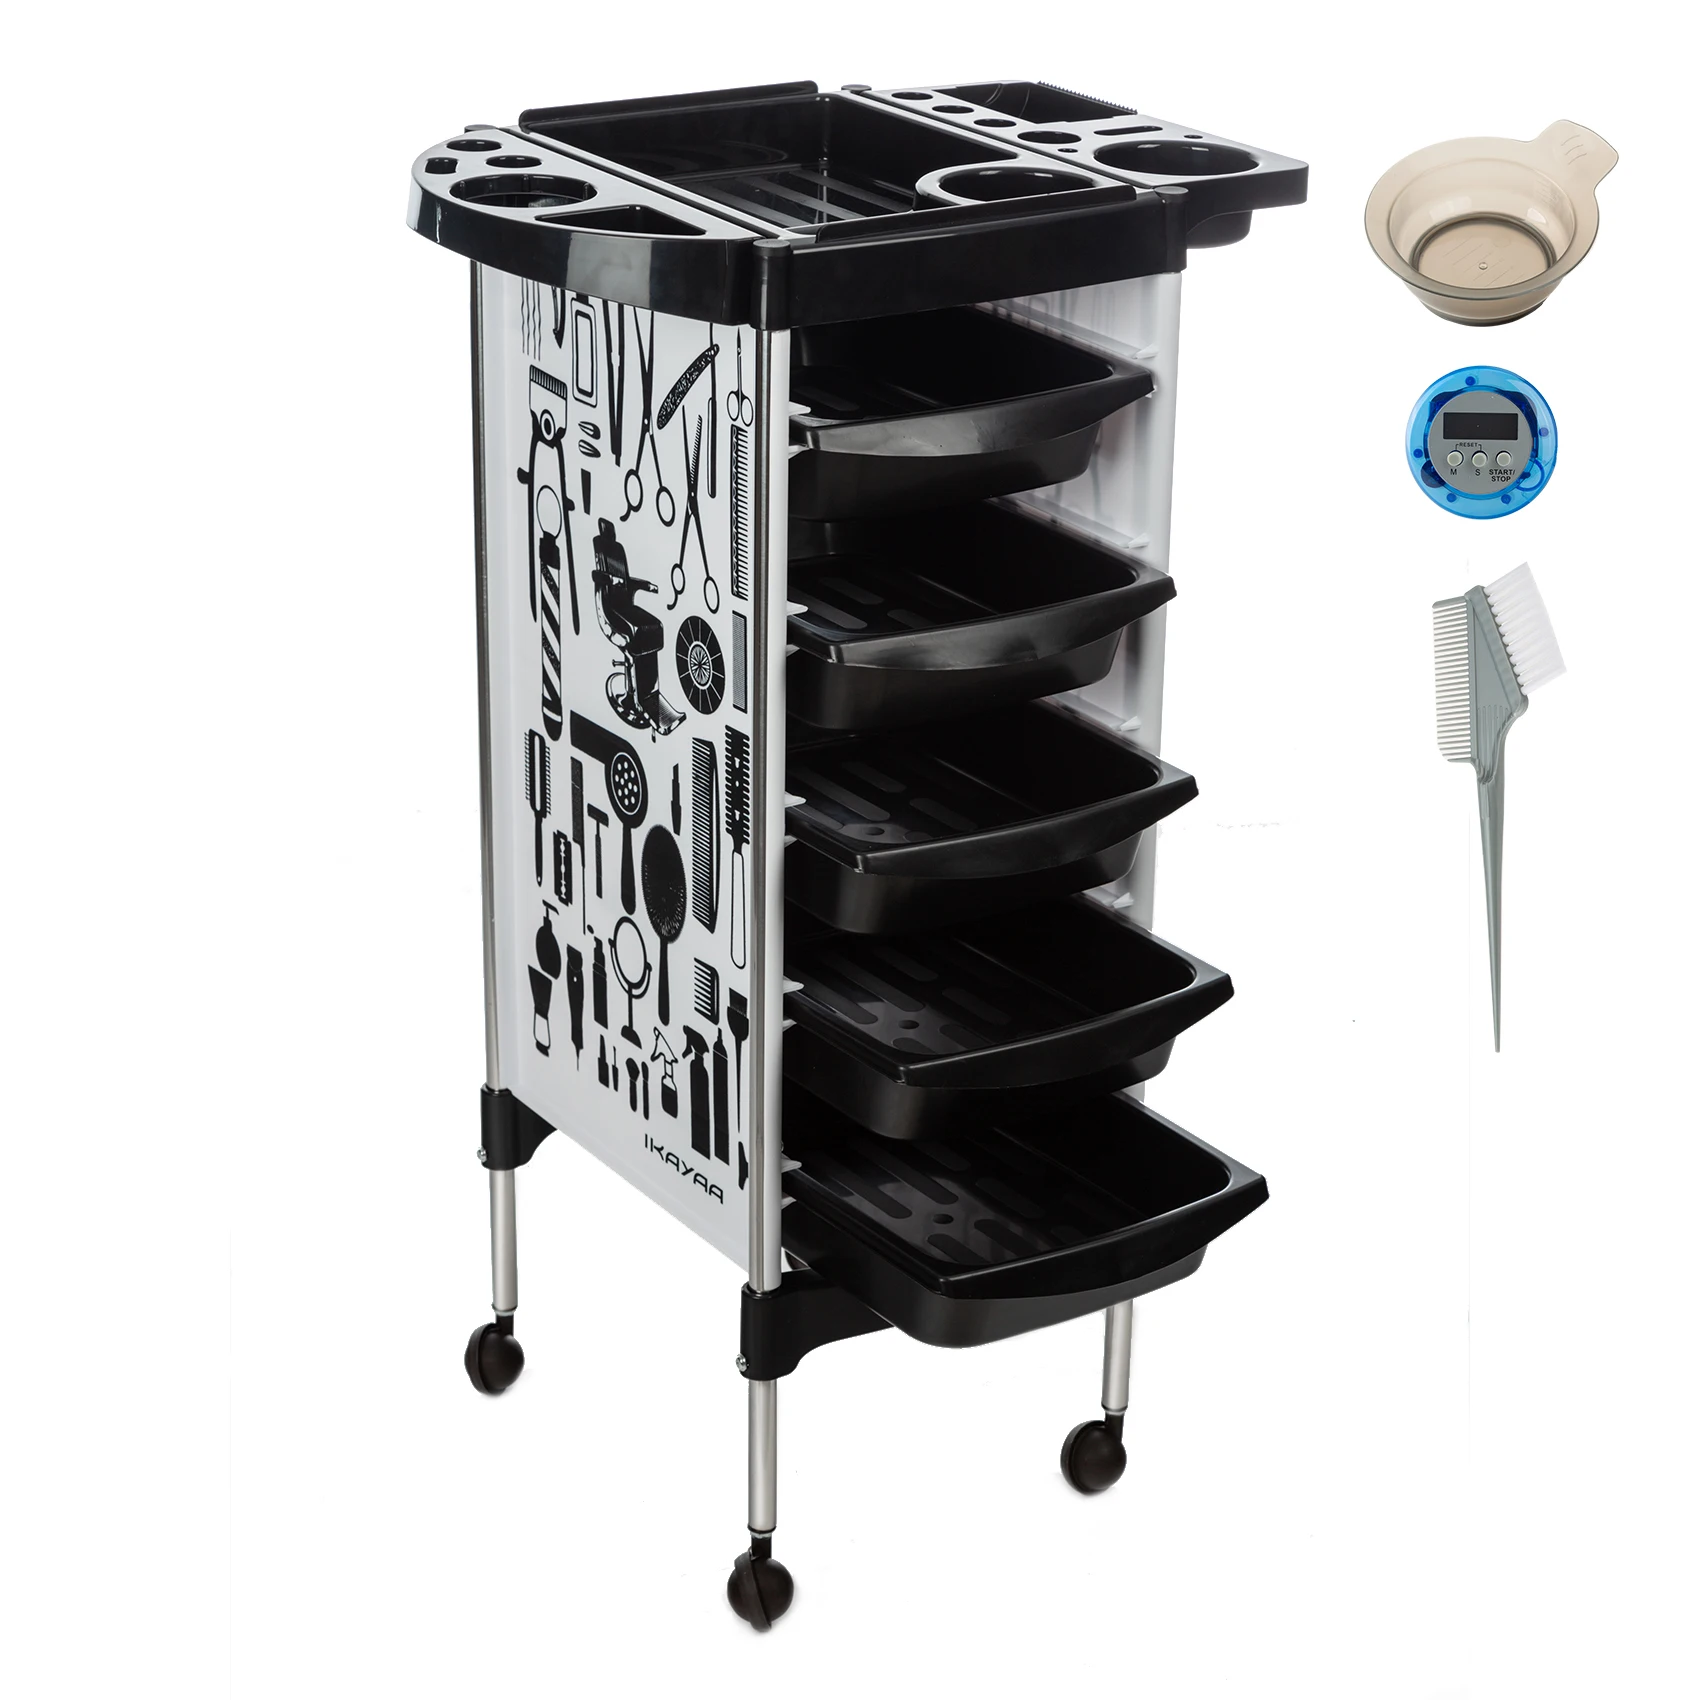 Salon Trolley Hairdressing Rolling Trolley Cart with 5 Slide-Out Drawers SPA Hair Styling Storage Station Tray Service Cart Tool